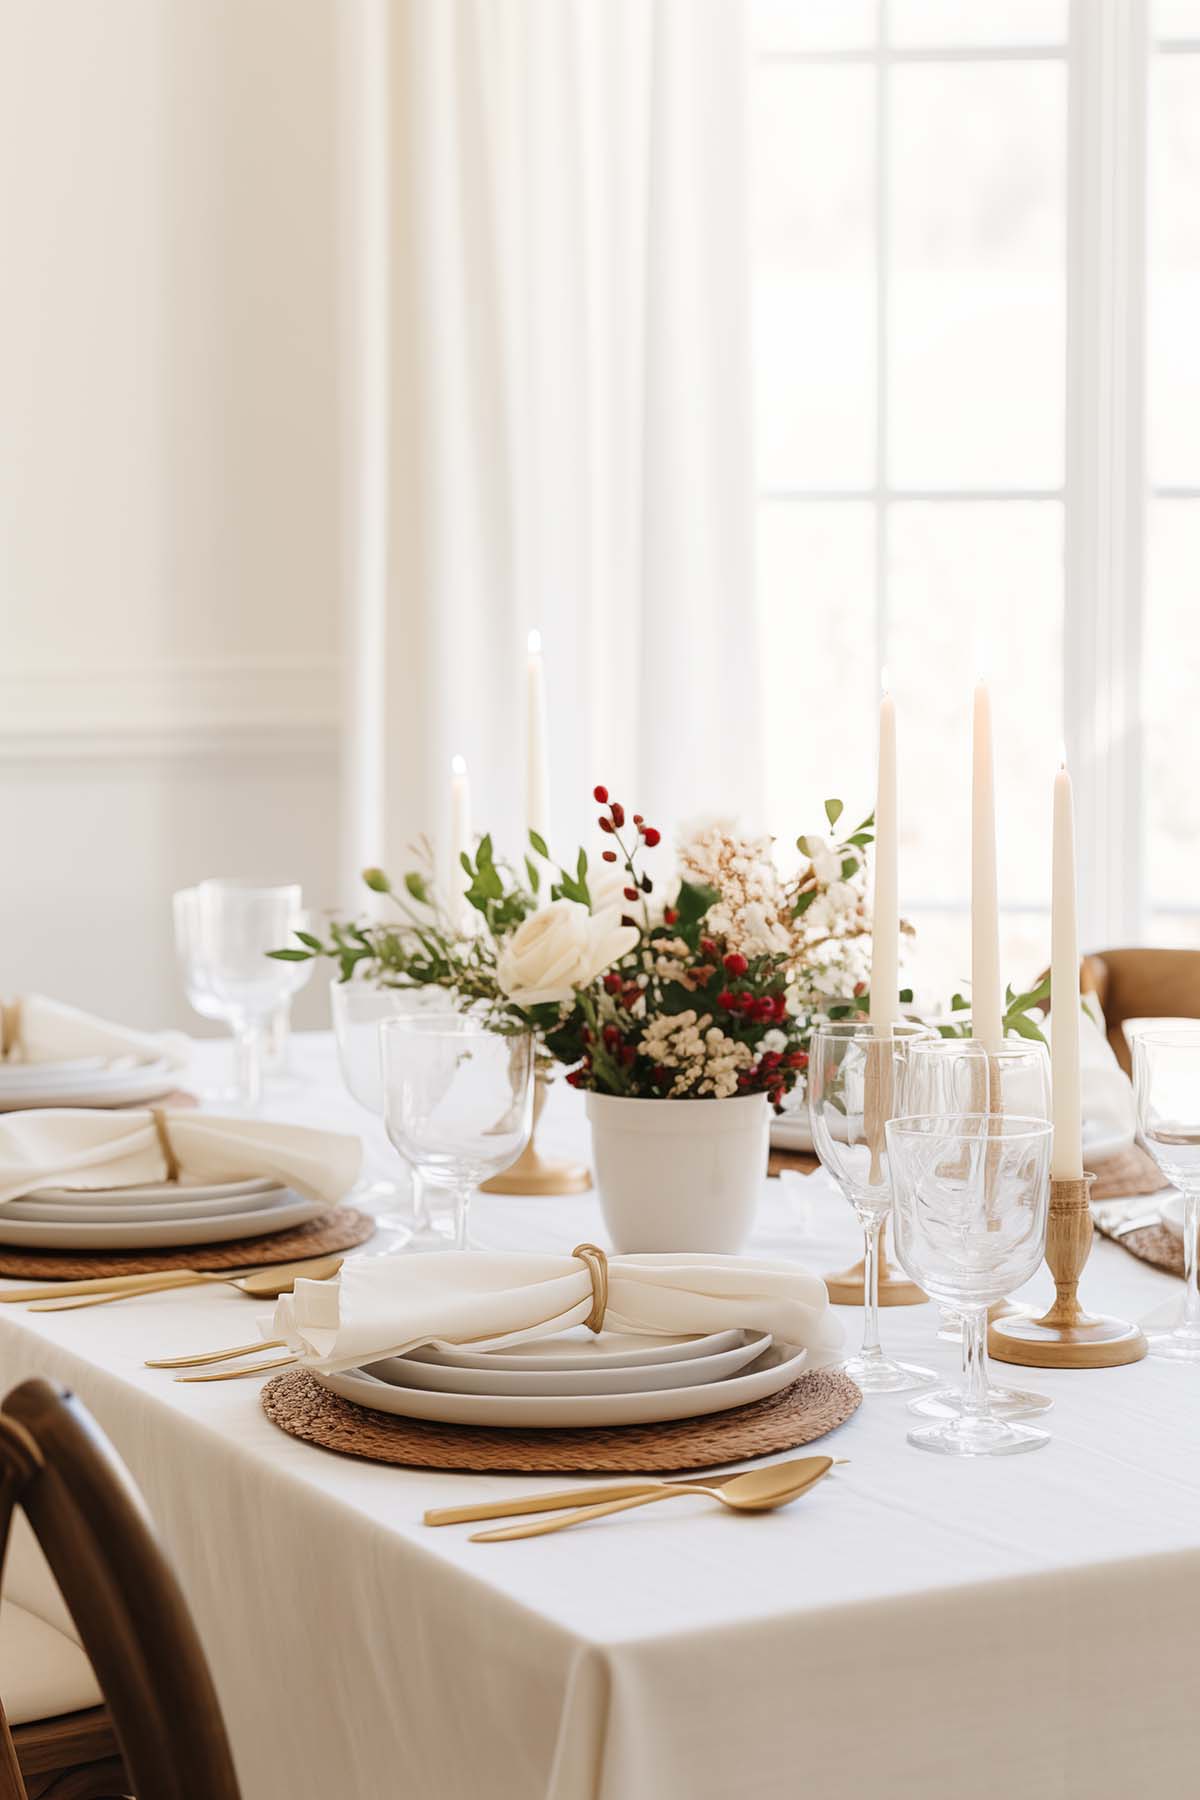 simple white tablesetting with vase of  greenery, white flowers and red berries.